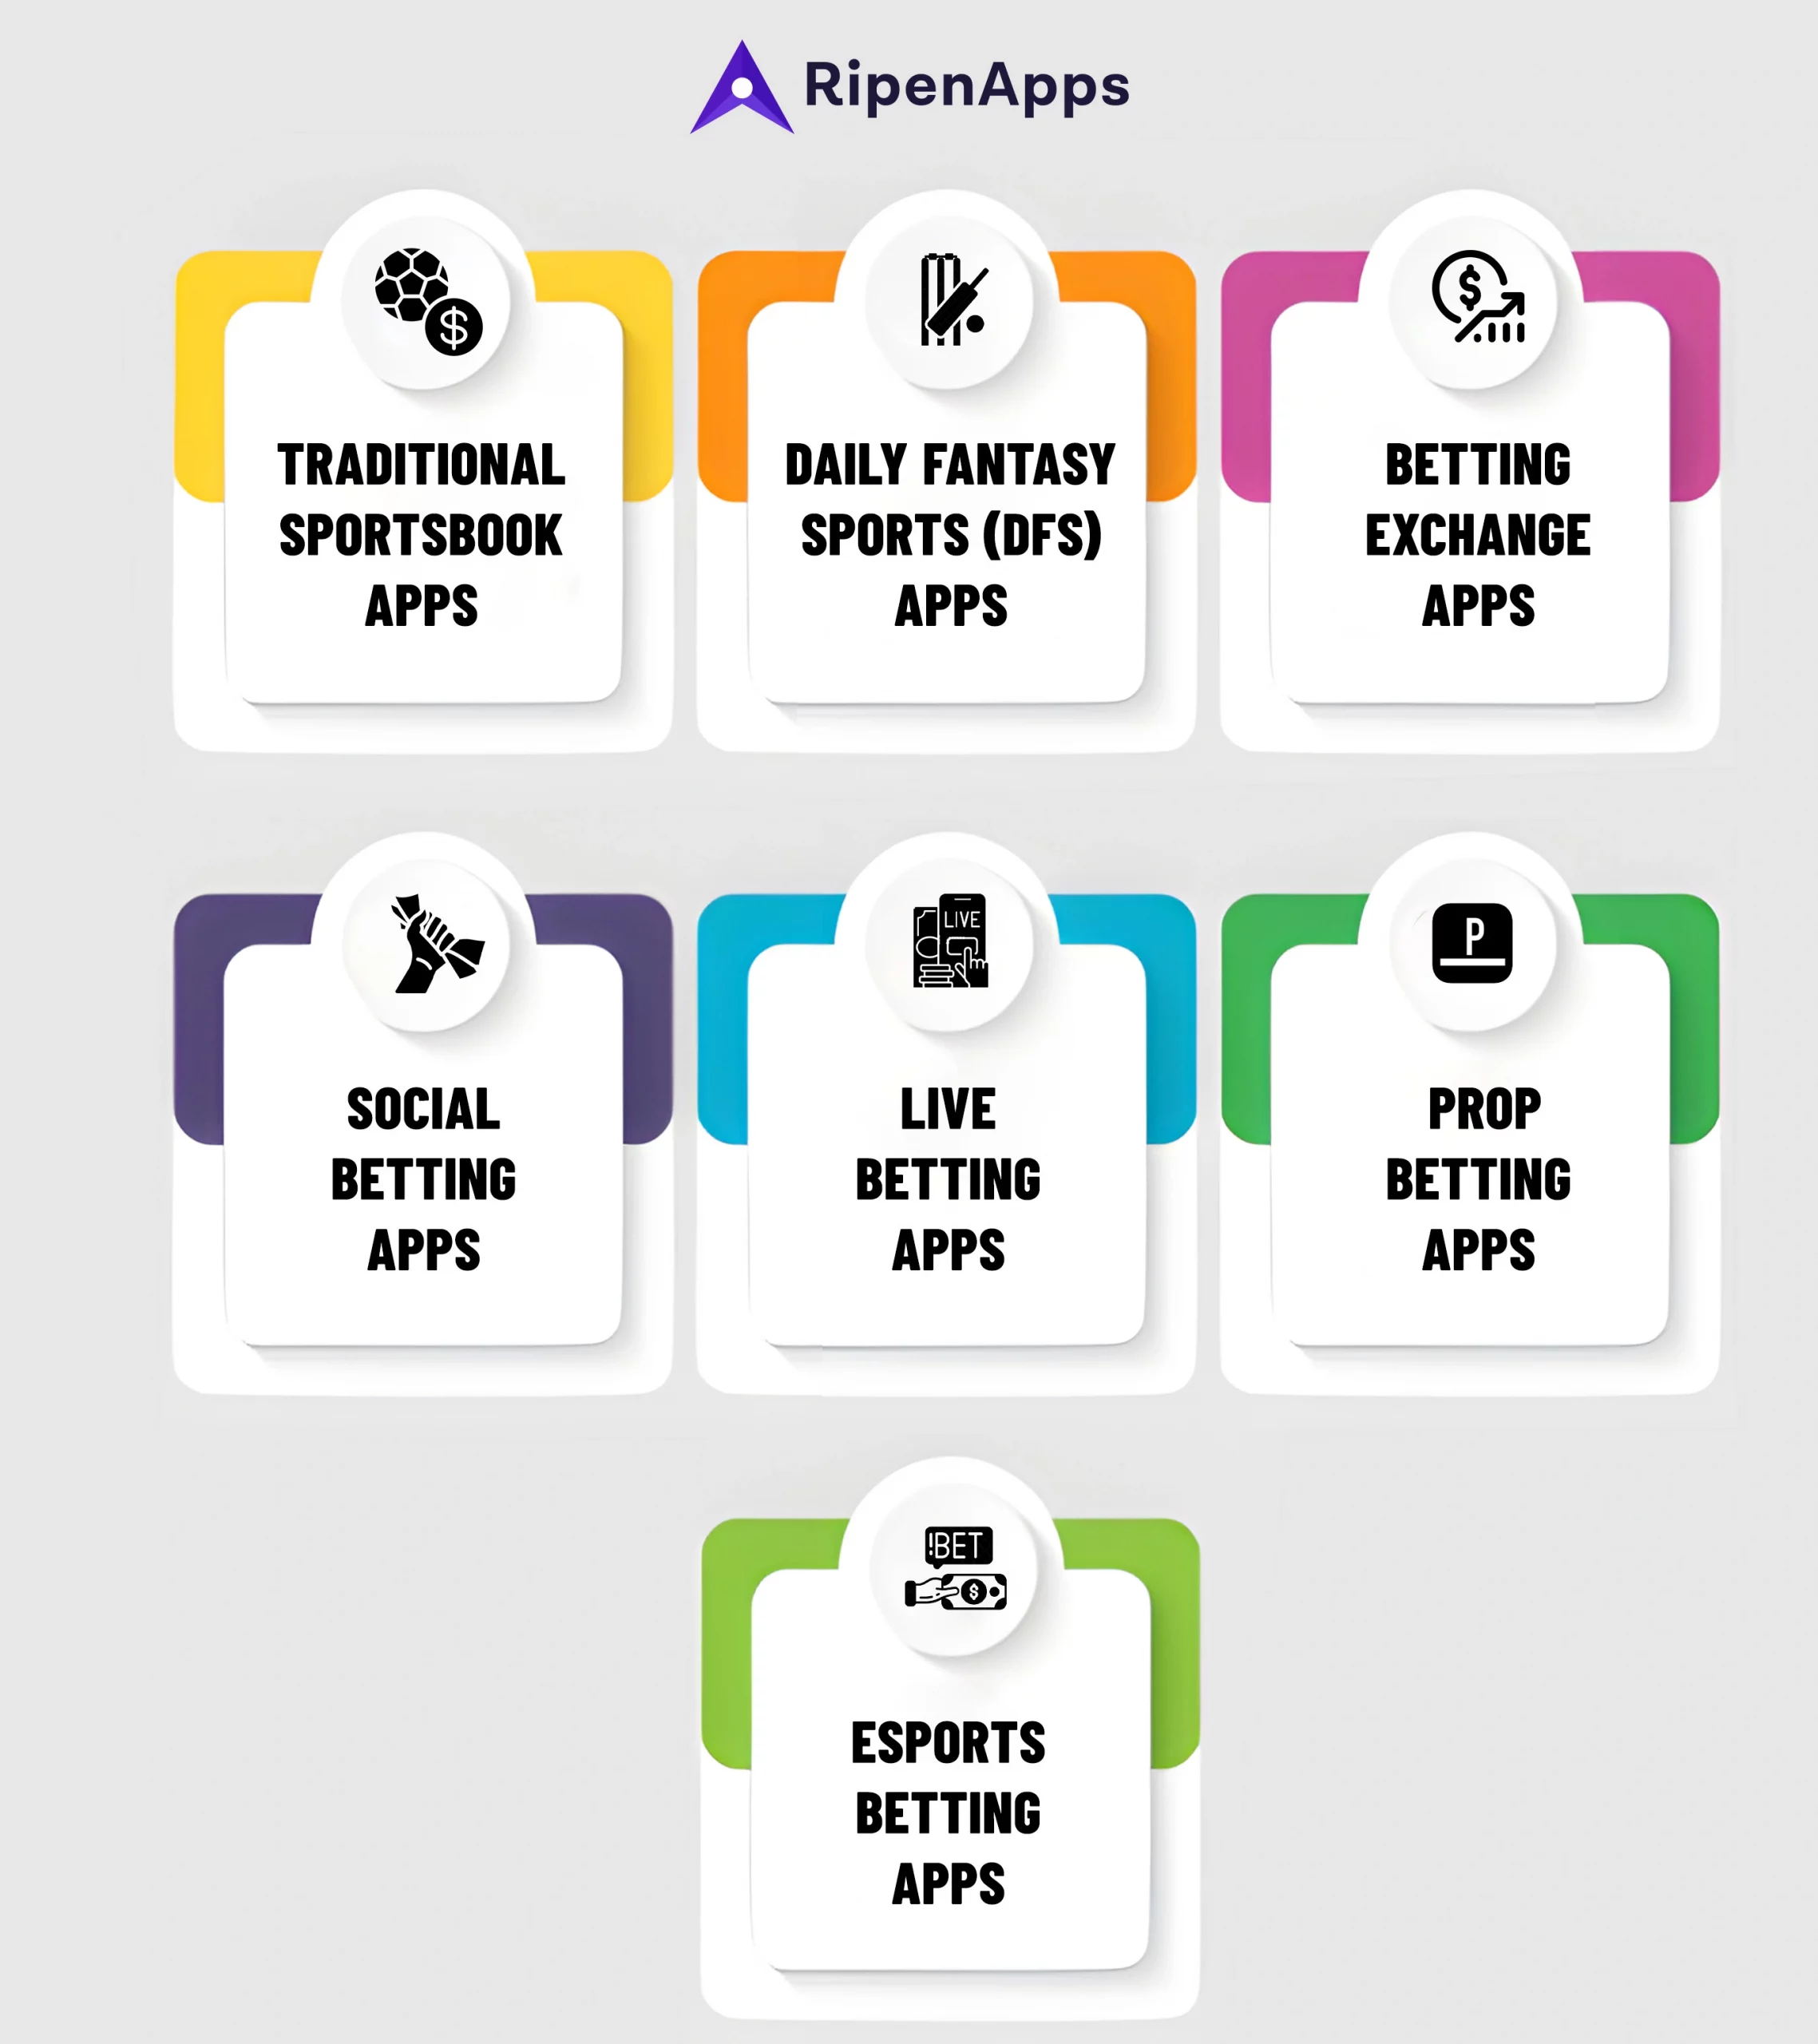 Types of sports betting apps